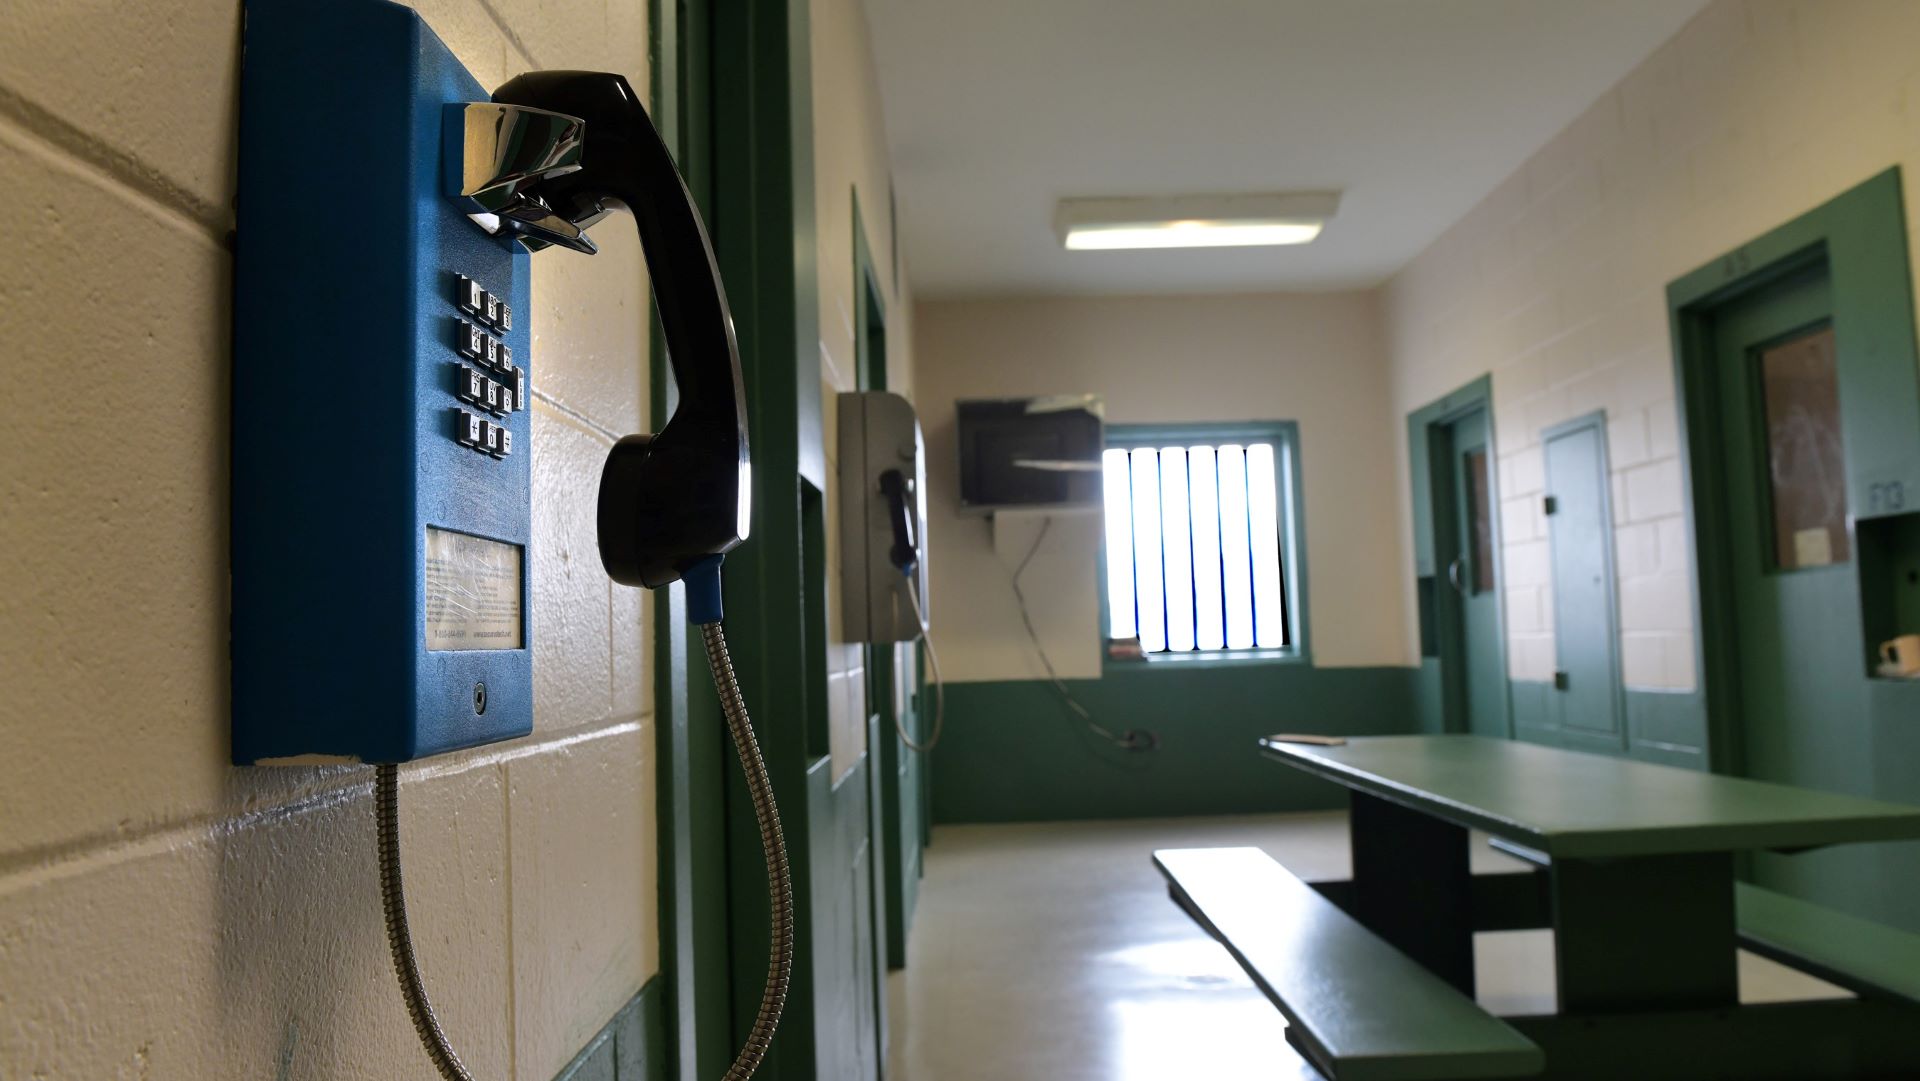 Jailed defendants expected private attorney calls. They didn’t always get them.